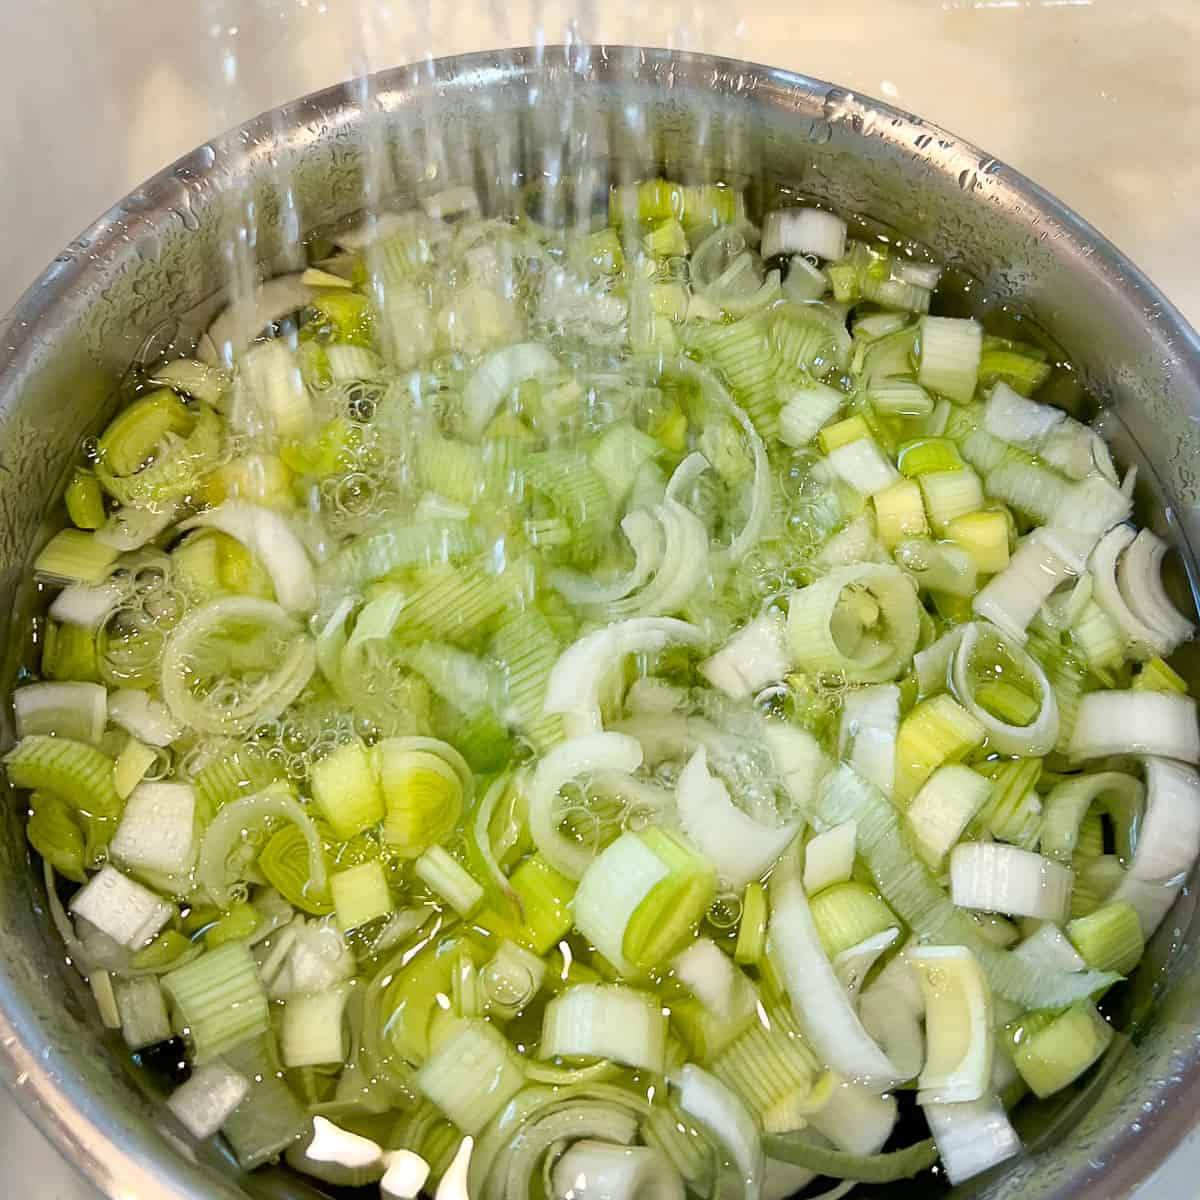 top view of a bowl of chopped leeks being rinsed in the sink under running water